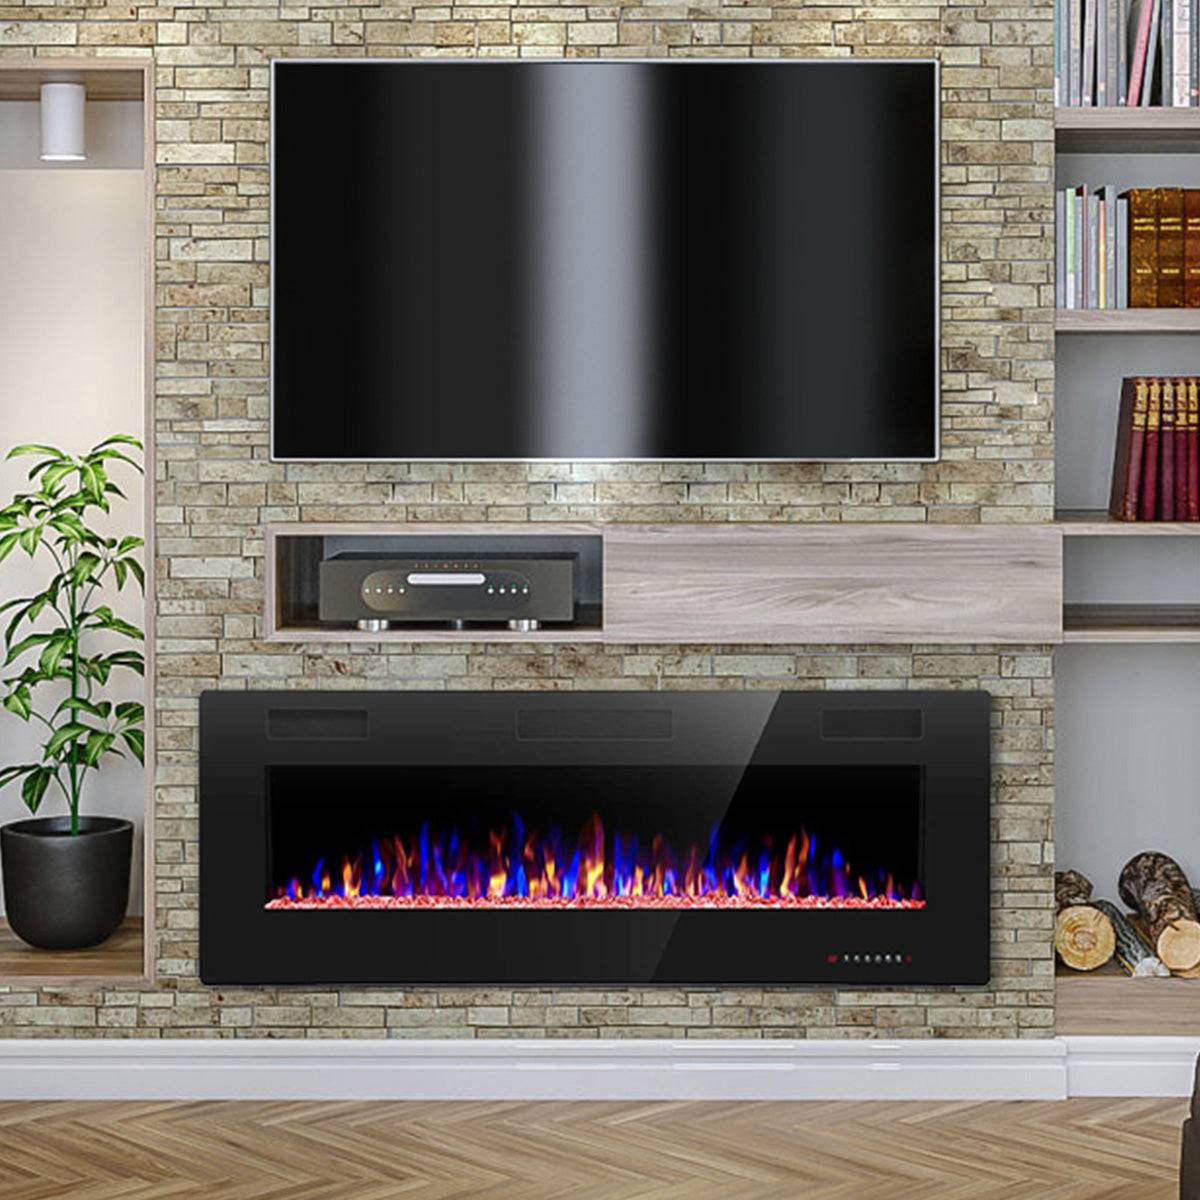 R.W.FLAME Recessed Wall Mounted Electric Fireplace, 750W-1500W